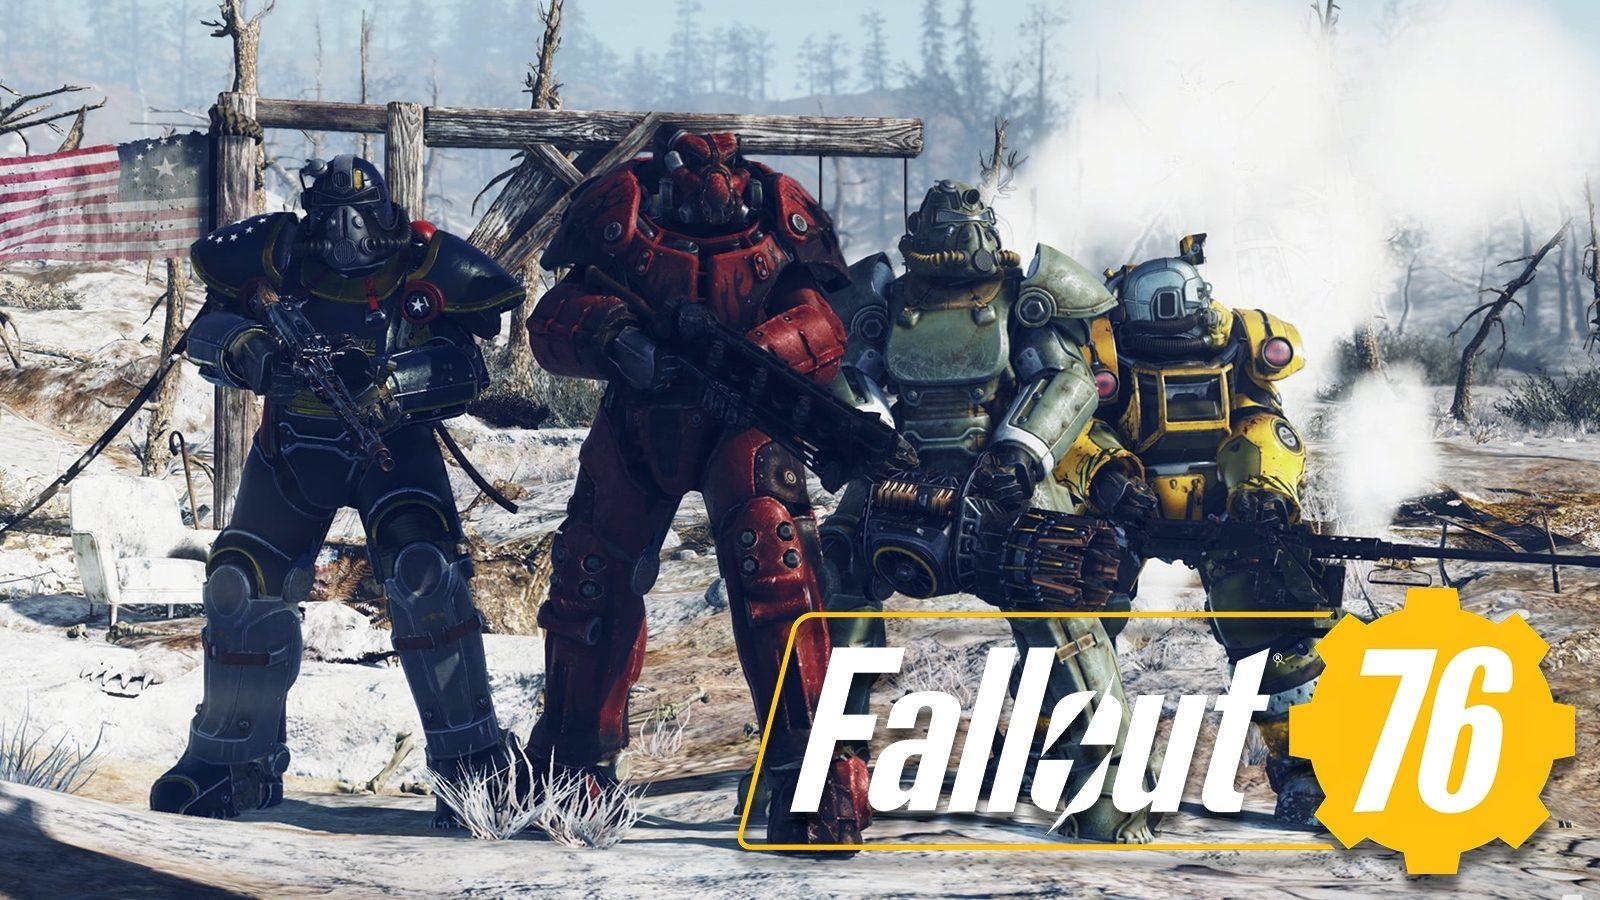 Fallout 4 is now the most modded Fallout game - overtaking New